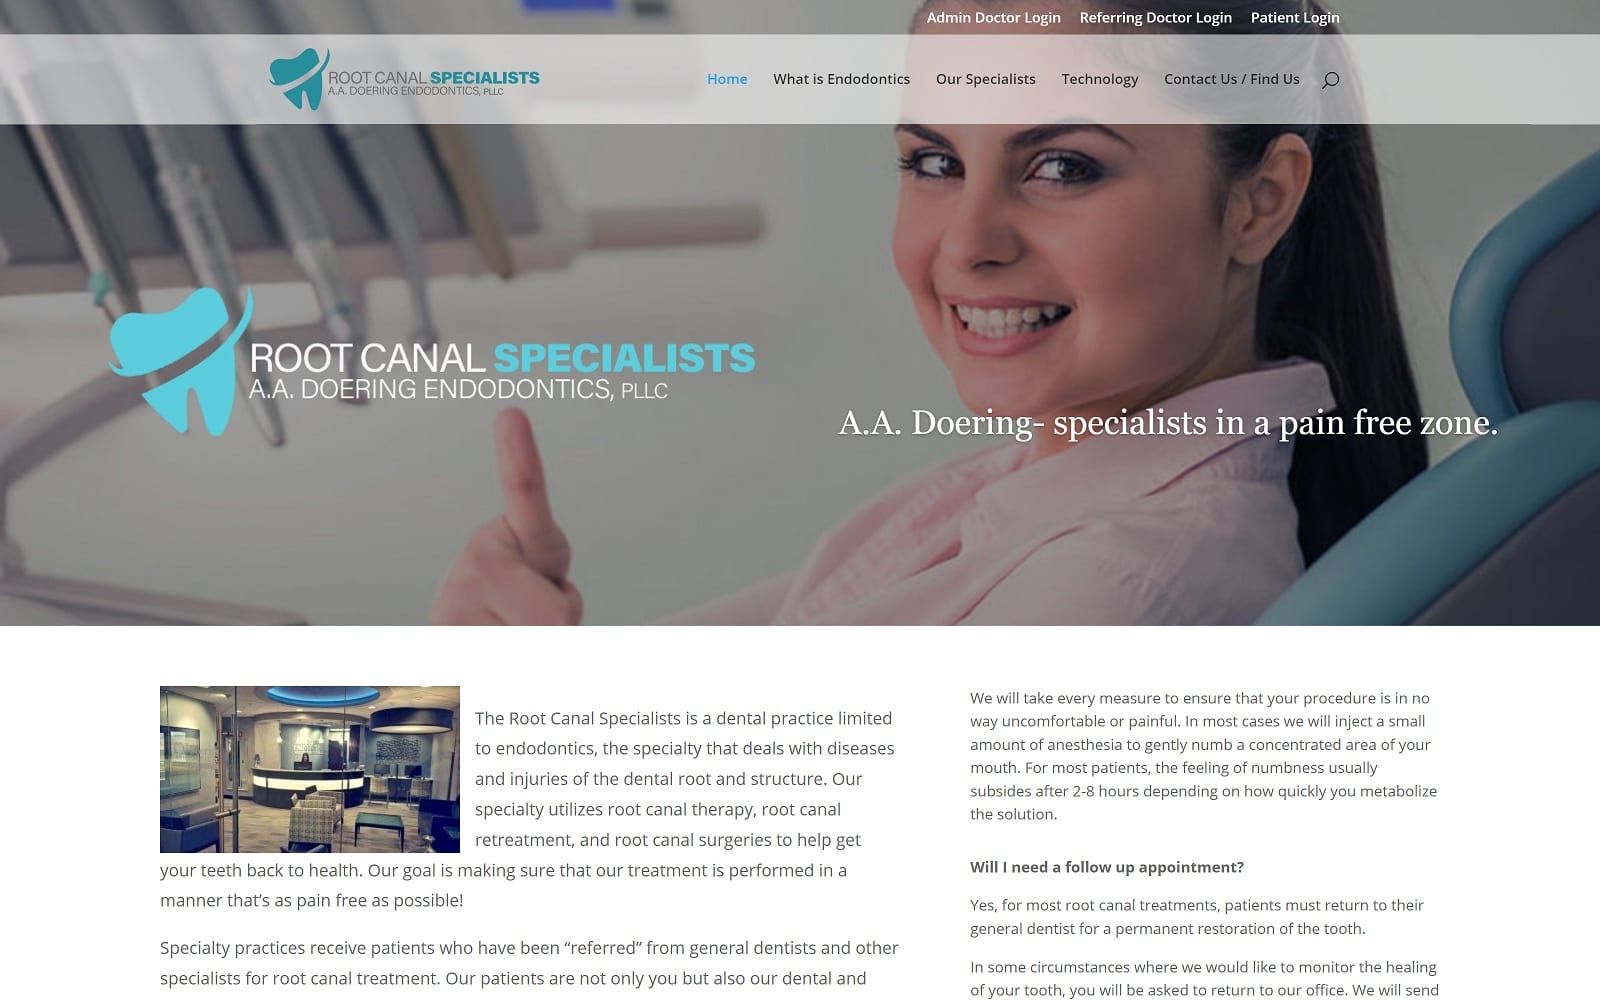 The screenshot of root canal specialists drs. Doering and selis aadoeringendo. Com website